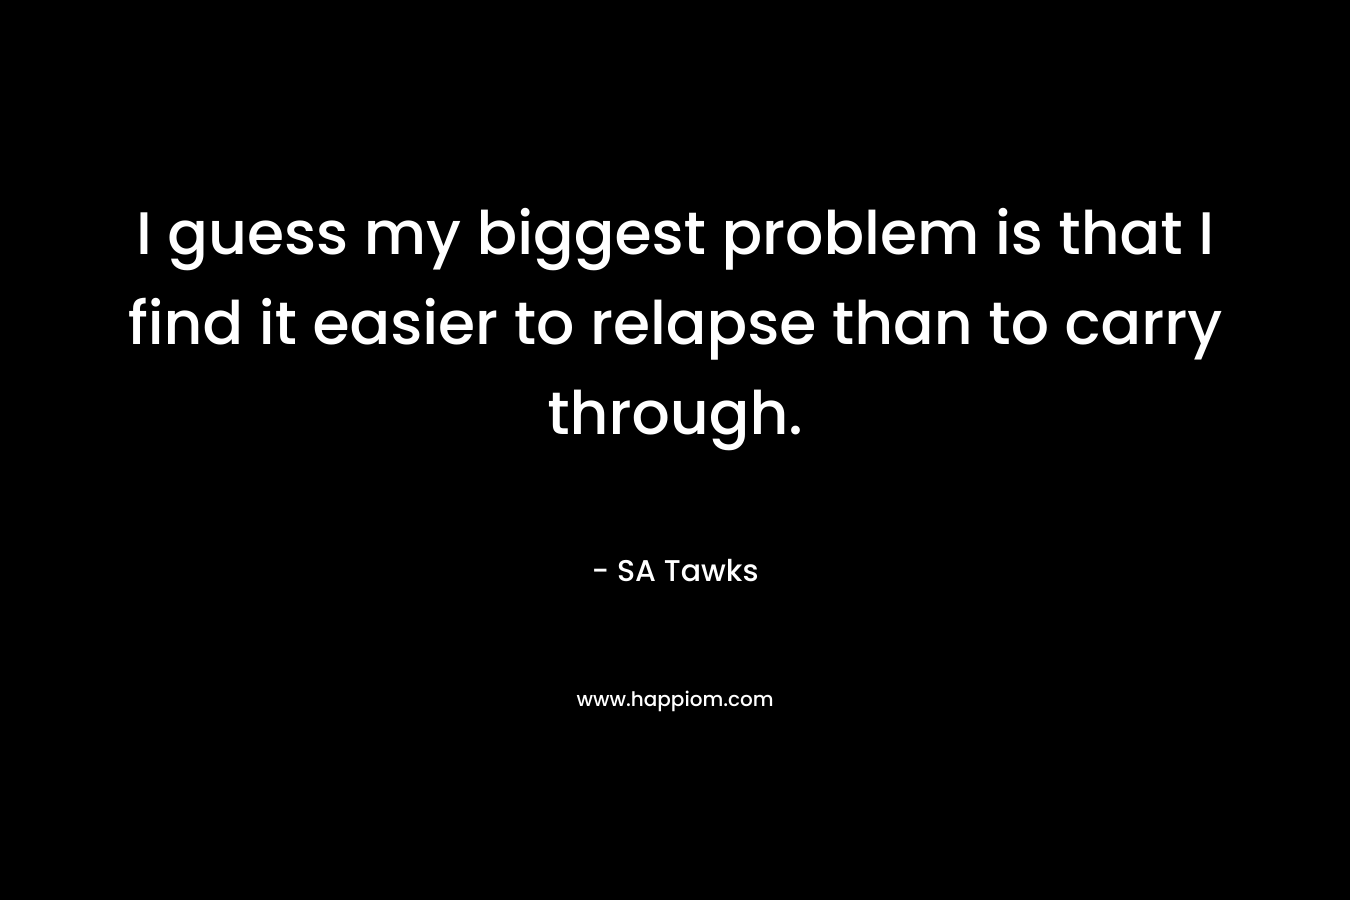 I guess my biggest problem is that I find it easier to relapse than to carry through.